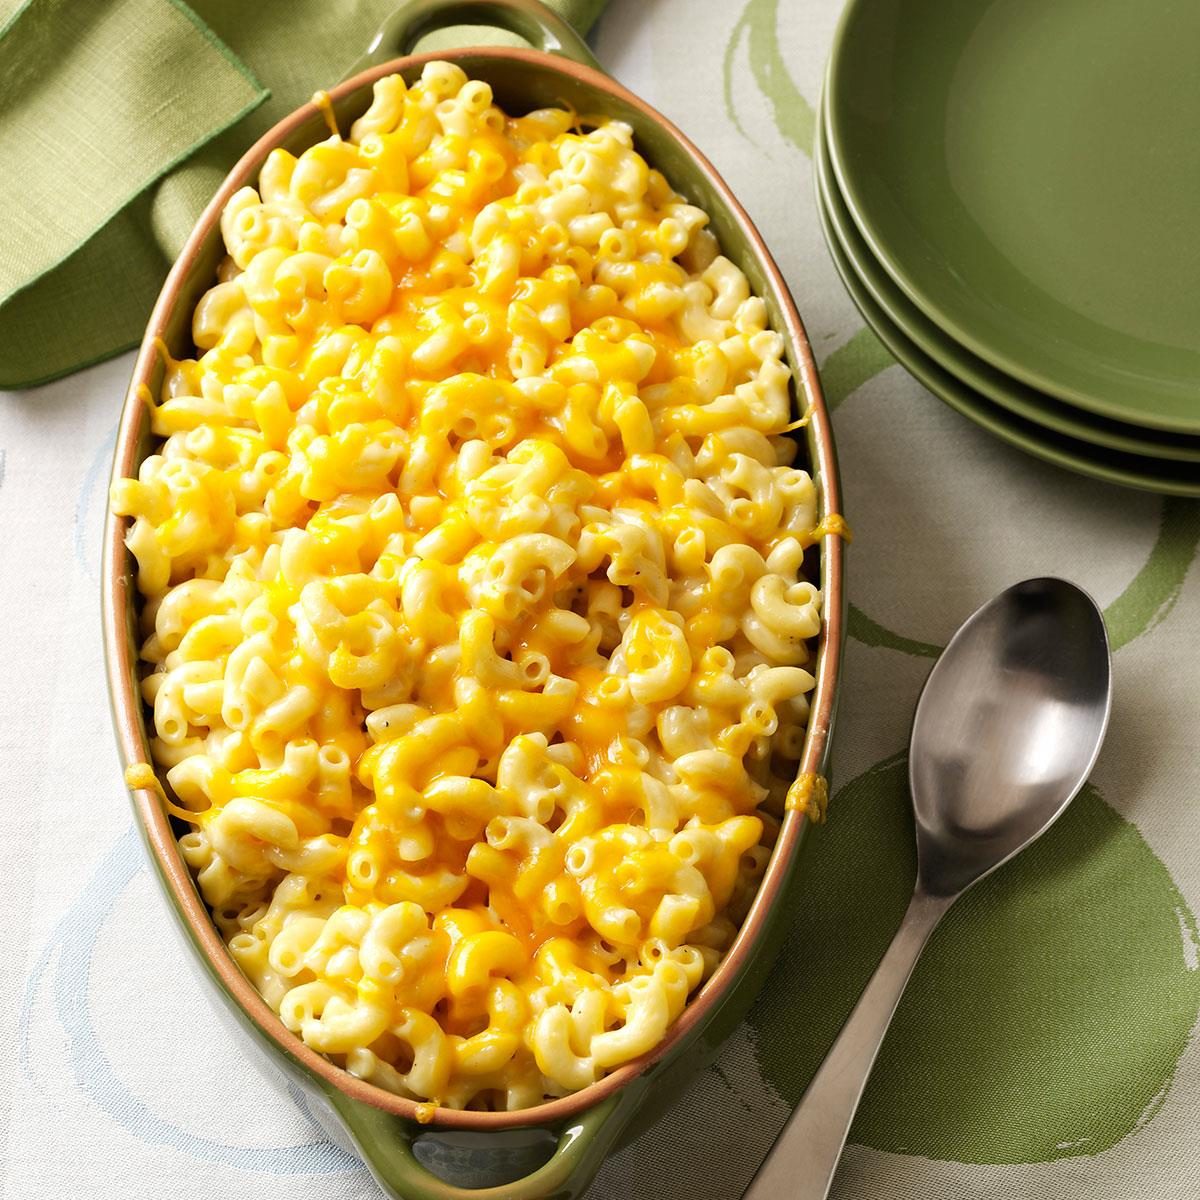 Over-the-Top Mac 'n' Cheese